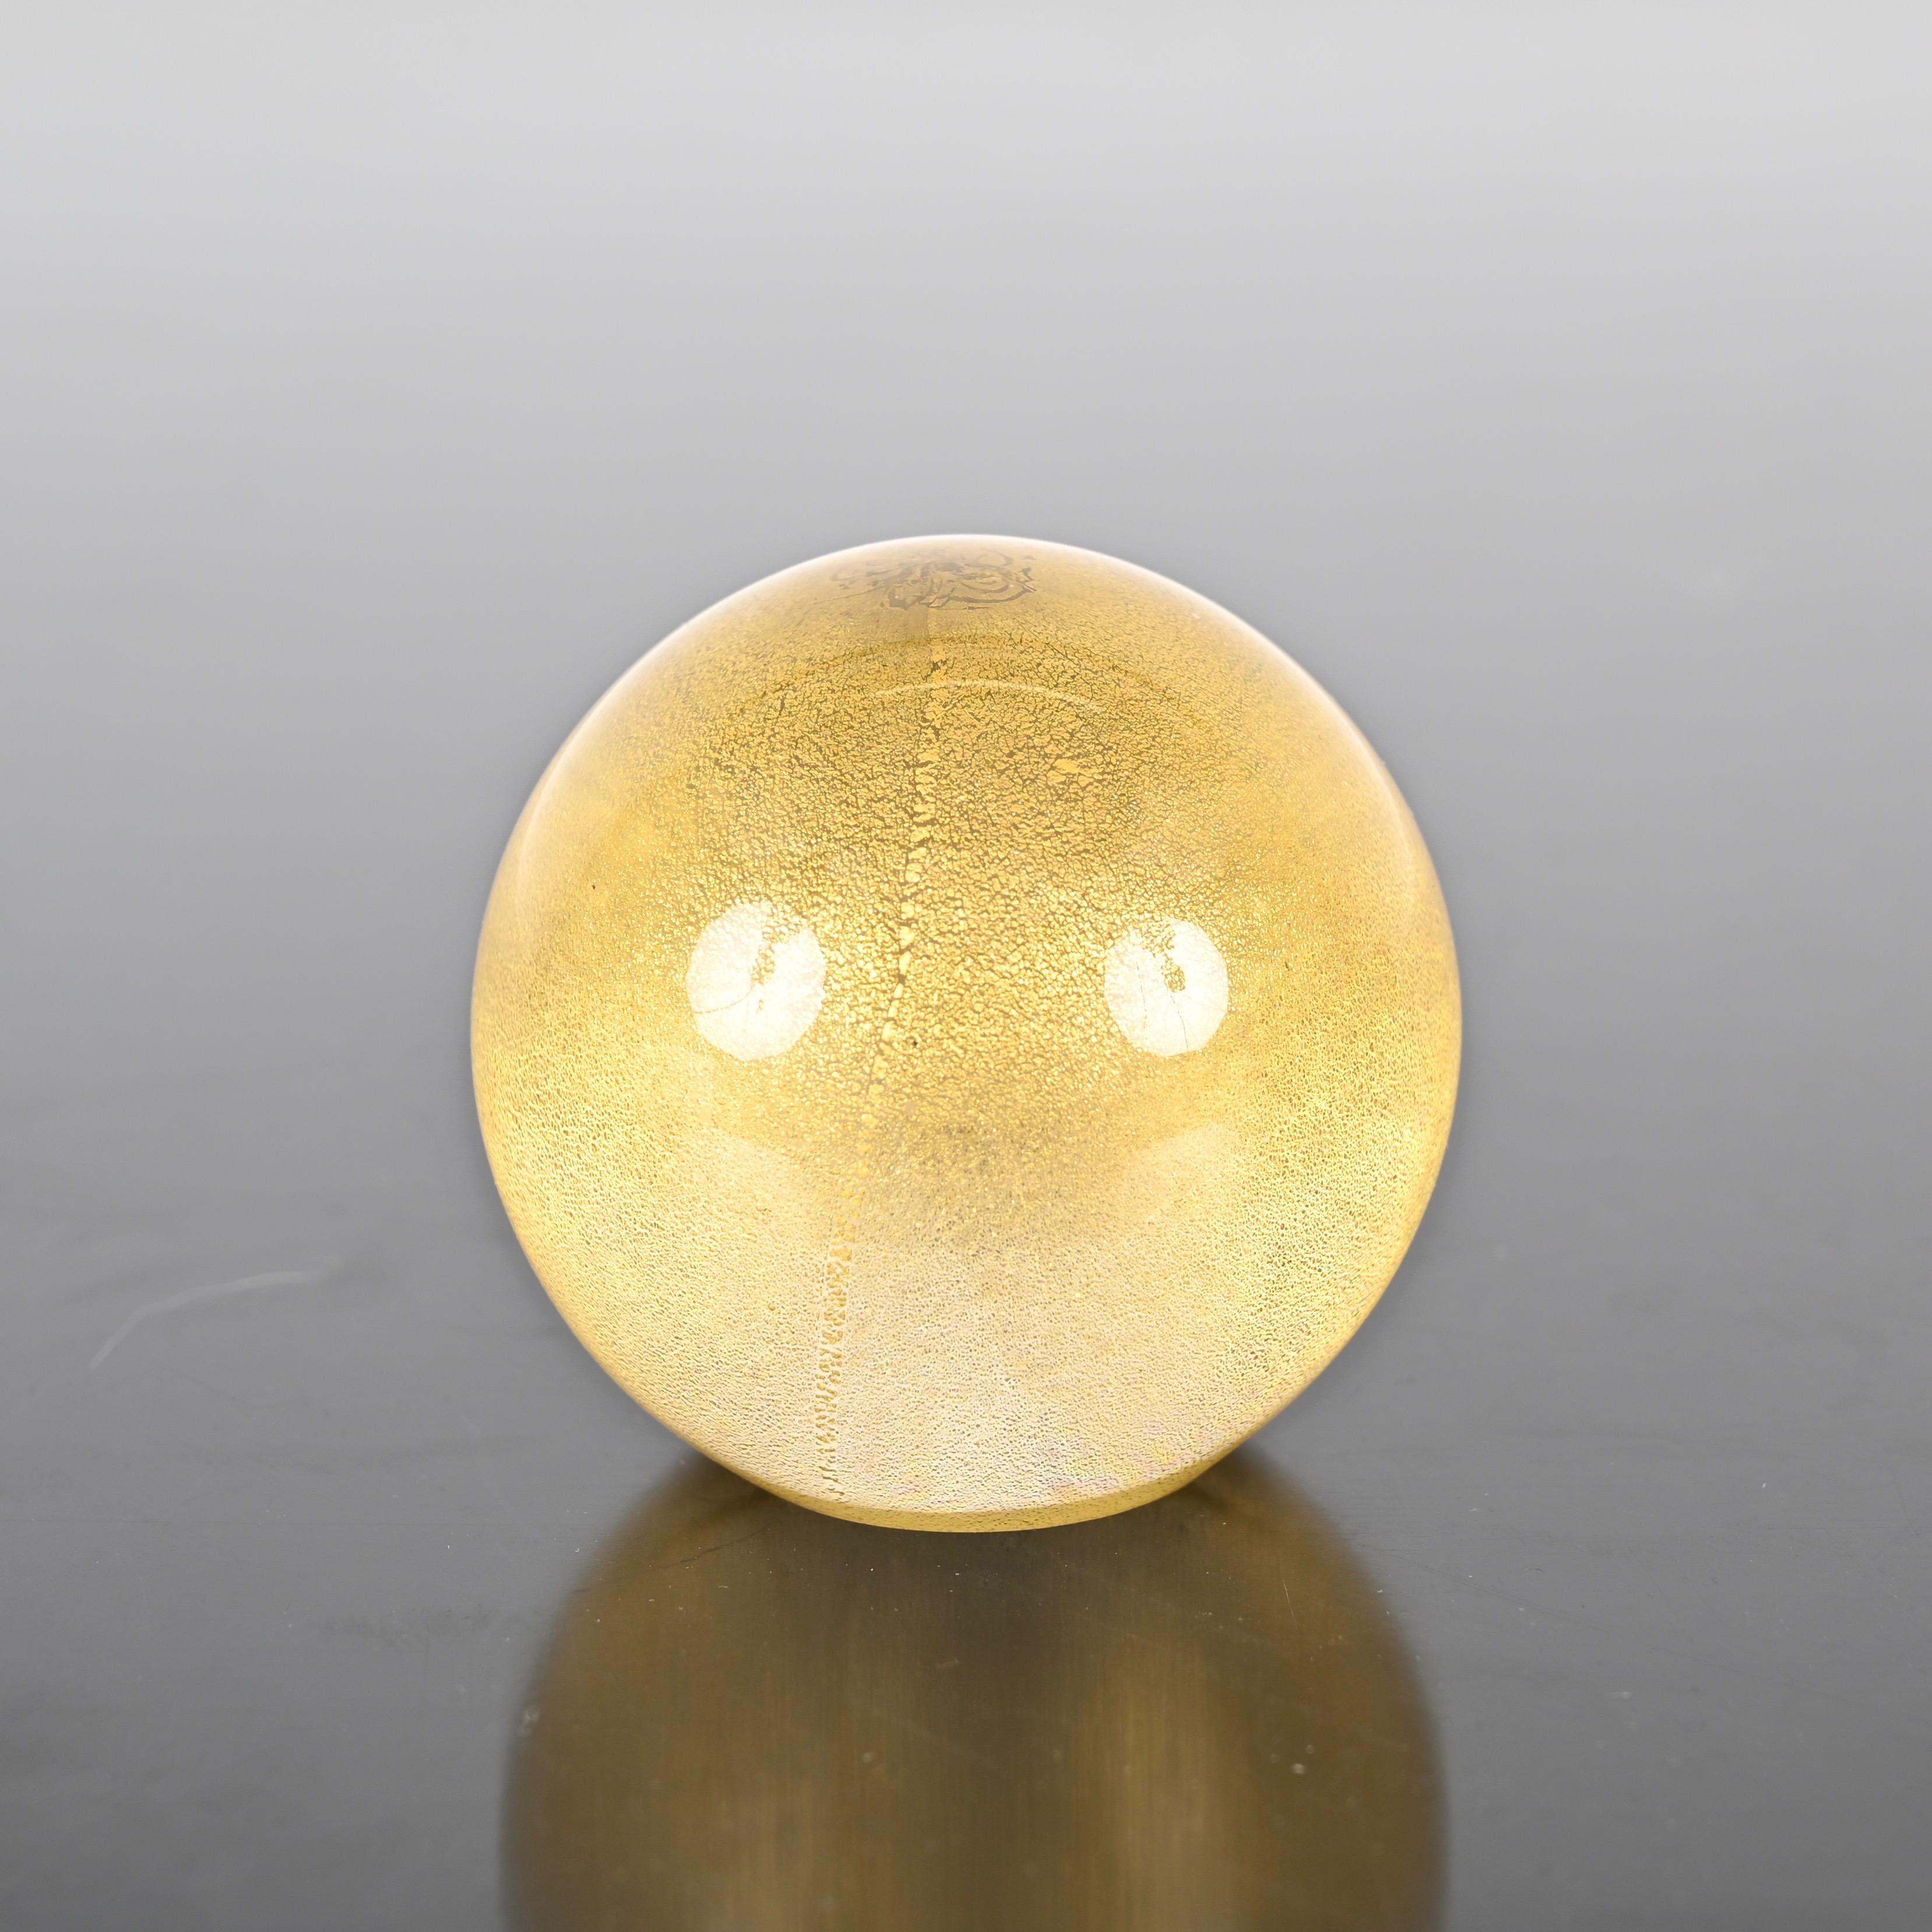 Seguso Spherical Paperweight in Murano Glass with Gold Dust, Italy 1950s For Sale 4